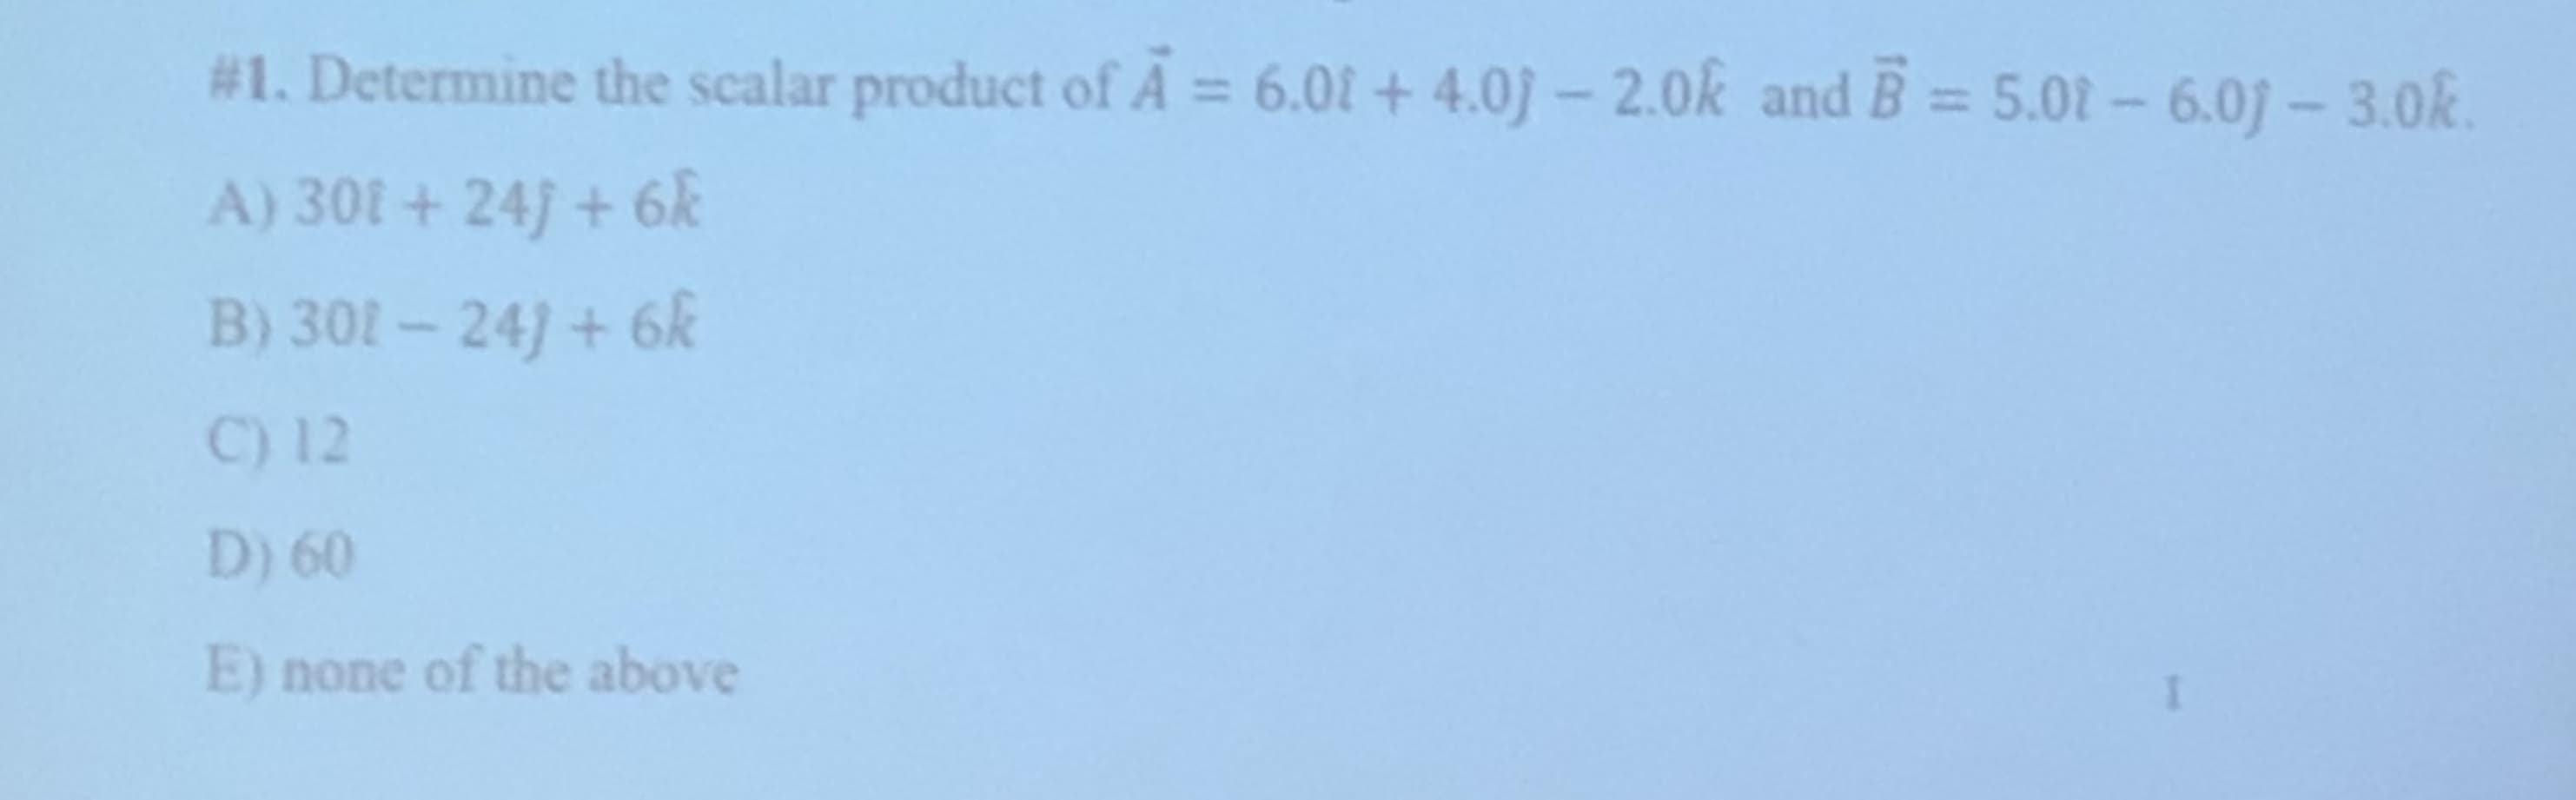 #1. Determine the scalar product of A
6.01+4.0j-2.0k and B=5.02-6.0-3.0
A) 301+ 24) + 6
B) 301-241+ 6
C) 12
D) 60
E) none of the above
